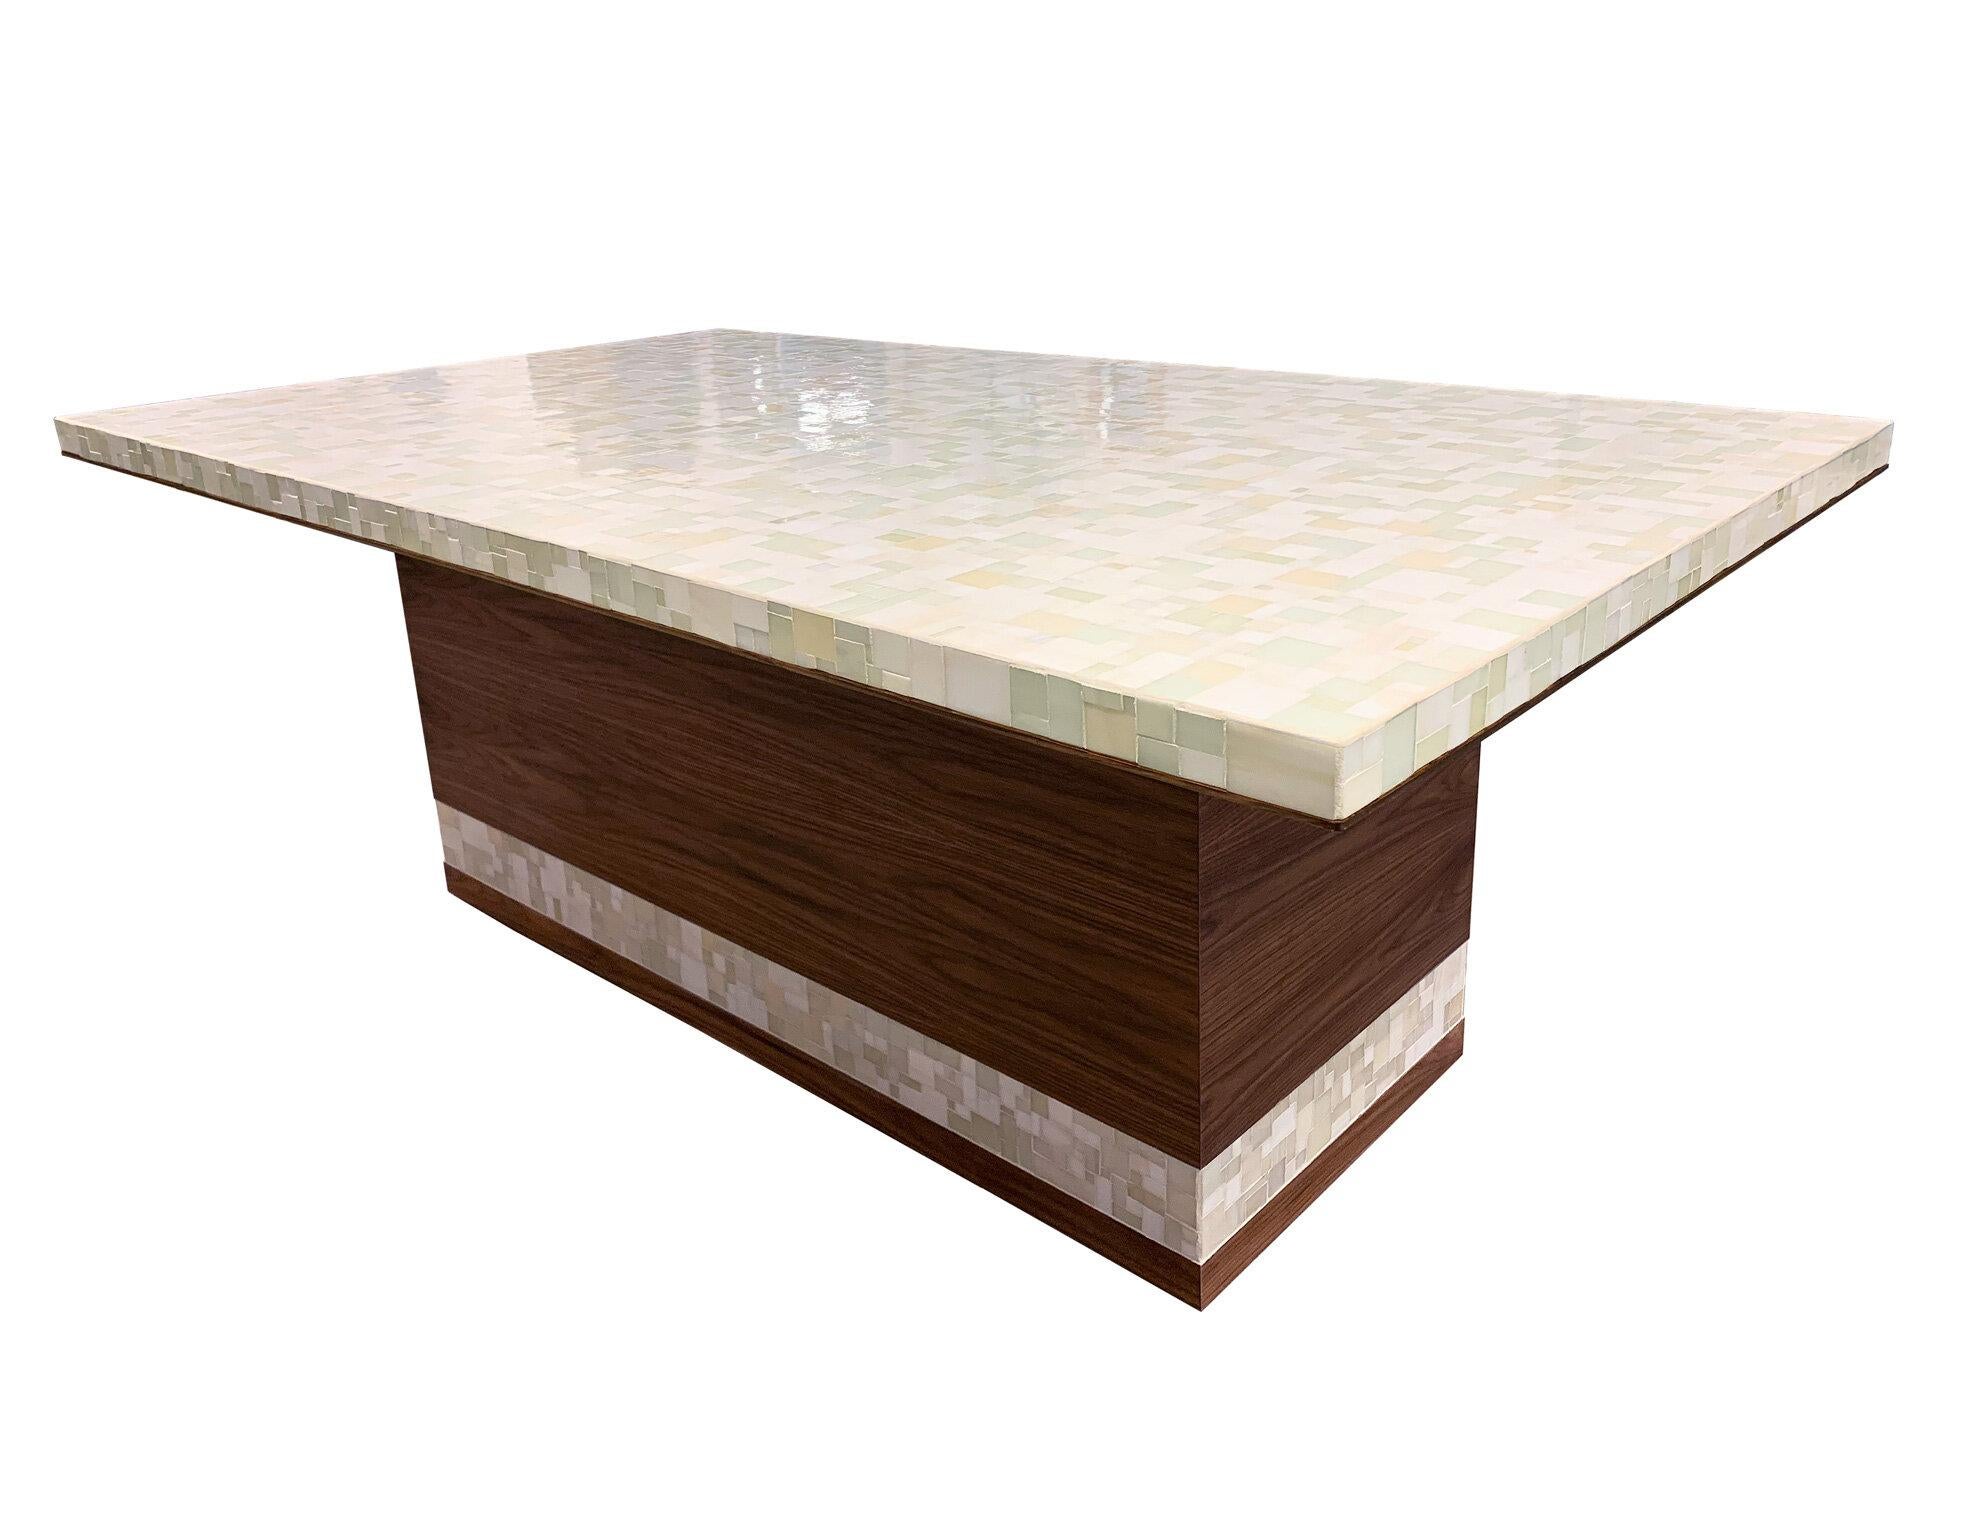 The Modern Mondrian Walnut Dining Table by Ercole Home is crafted from Walnut with a Natural Finish, with a pedestal base and Mondrian Pattern mosaic tabletop in a mix of Ivory glass. Custom sizes and finishes are available. 

Made in Brooklyn.